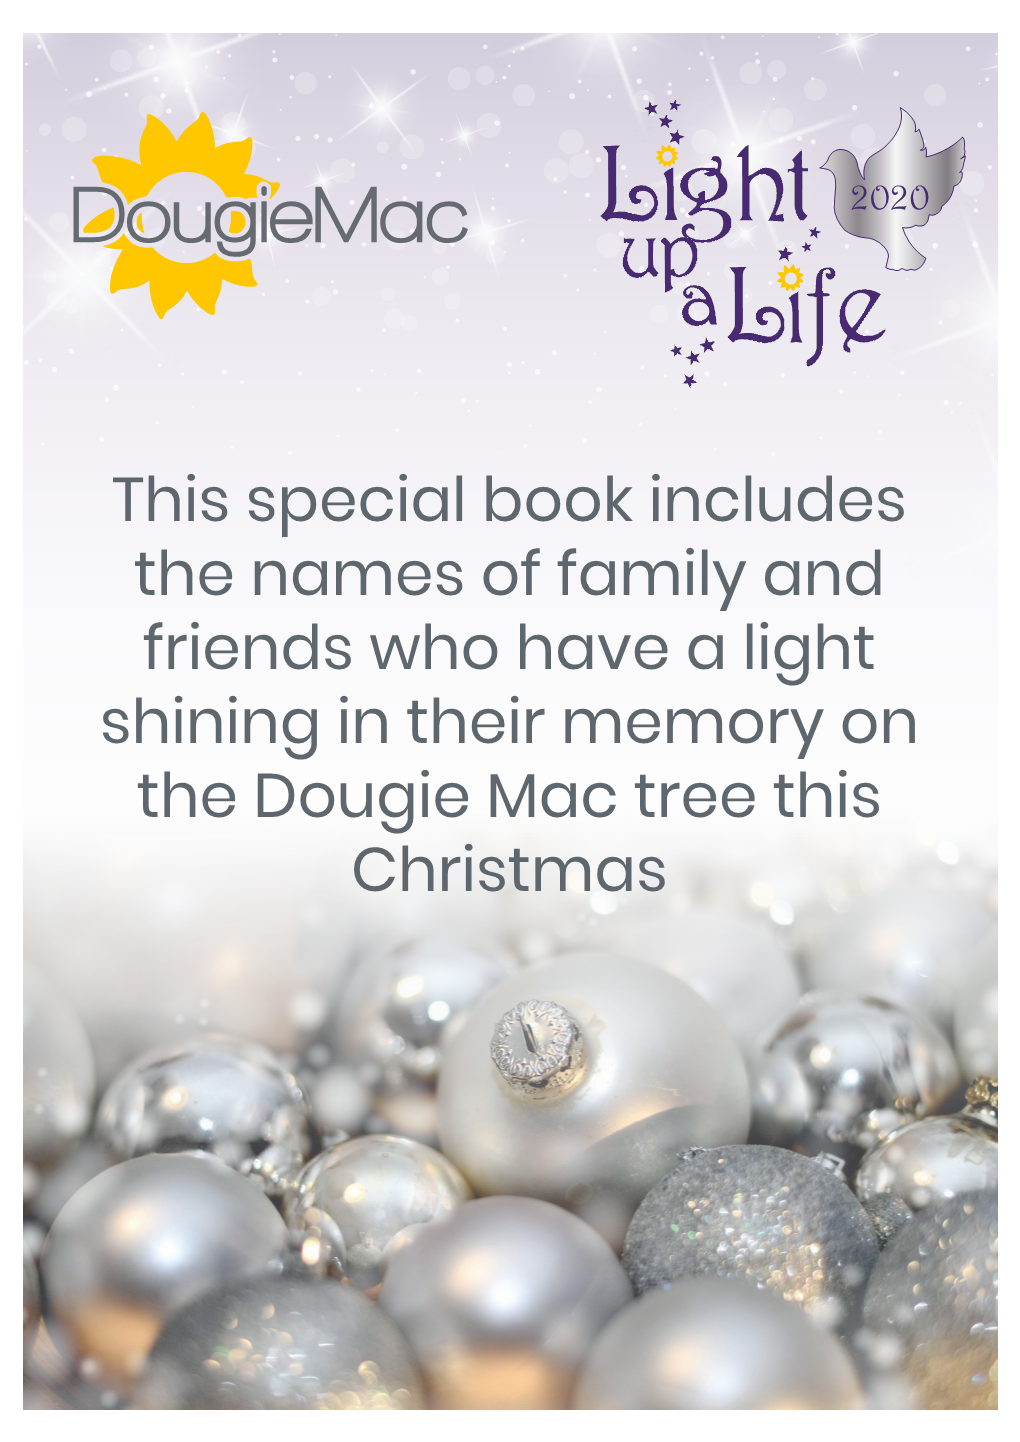 This Special Book Includes the Names of Family and Friends Who Have a Light Shining in Their Memory on the Dougie Mac Tree This Christmas